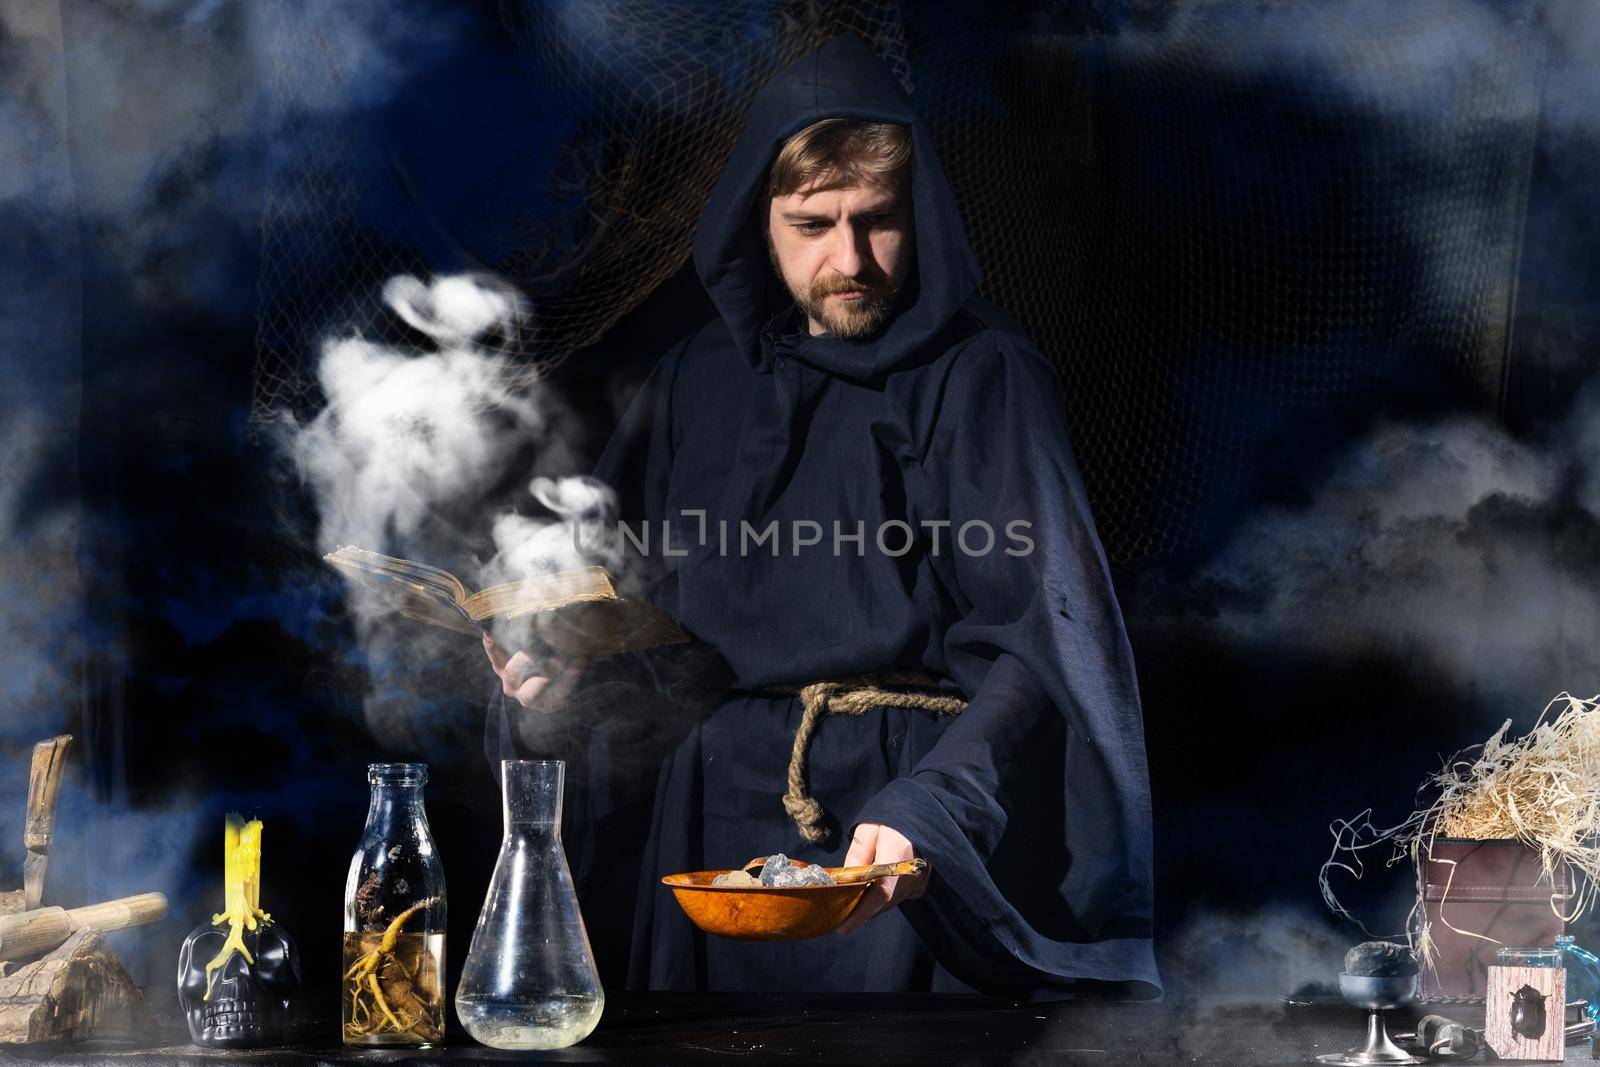 The medieval alchemist make magic ritual at the table in his smoke laboratory. Halloween concepy background.